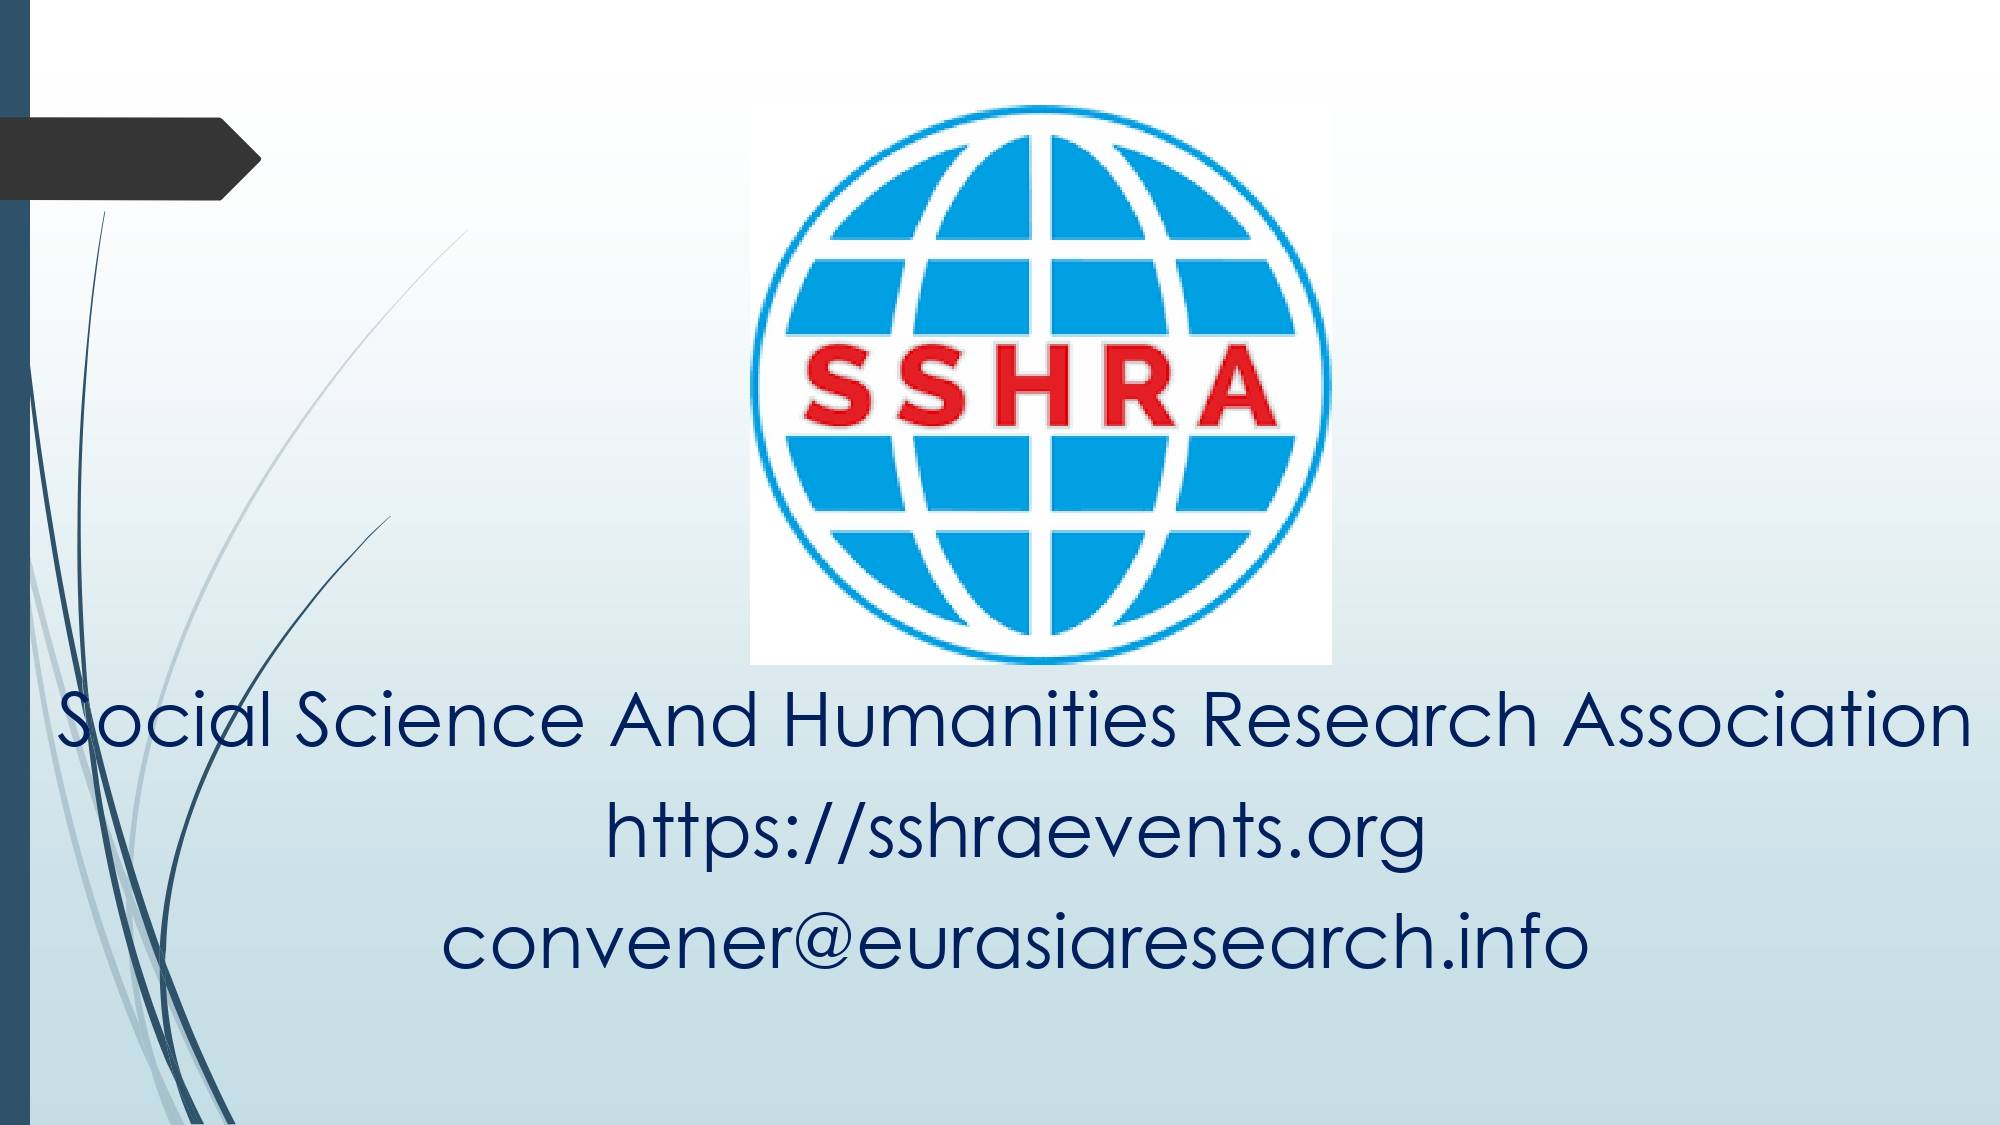 SSHRA 2023 – Social Science & Humanities Research Association International Conference, 04-05 October, Istanbul